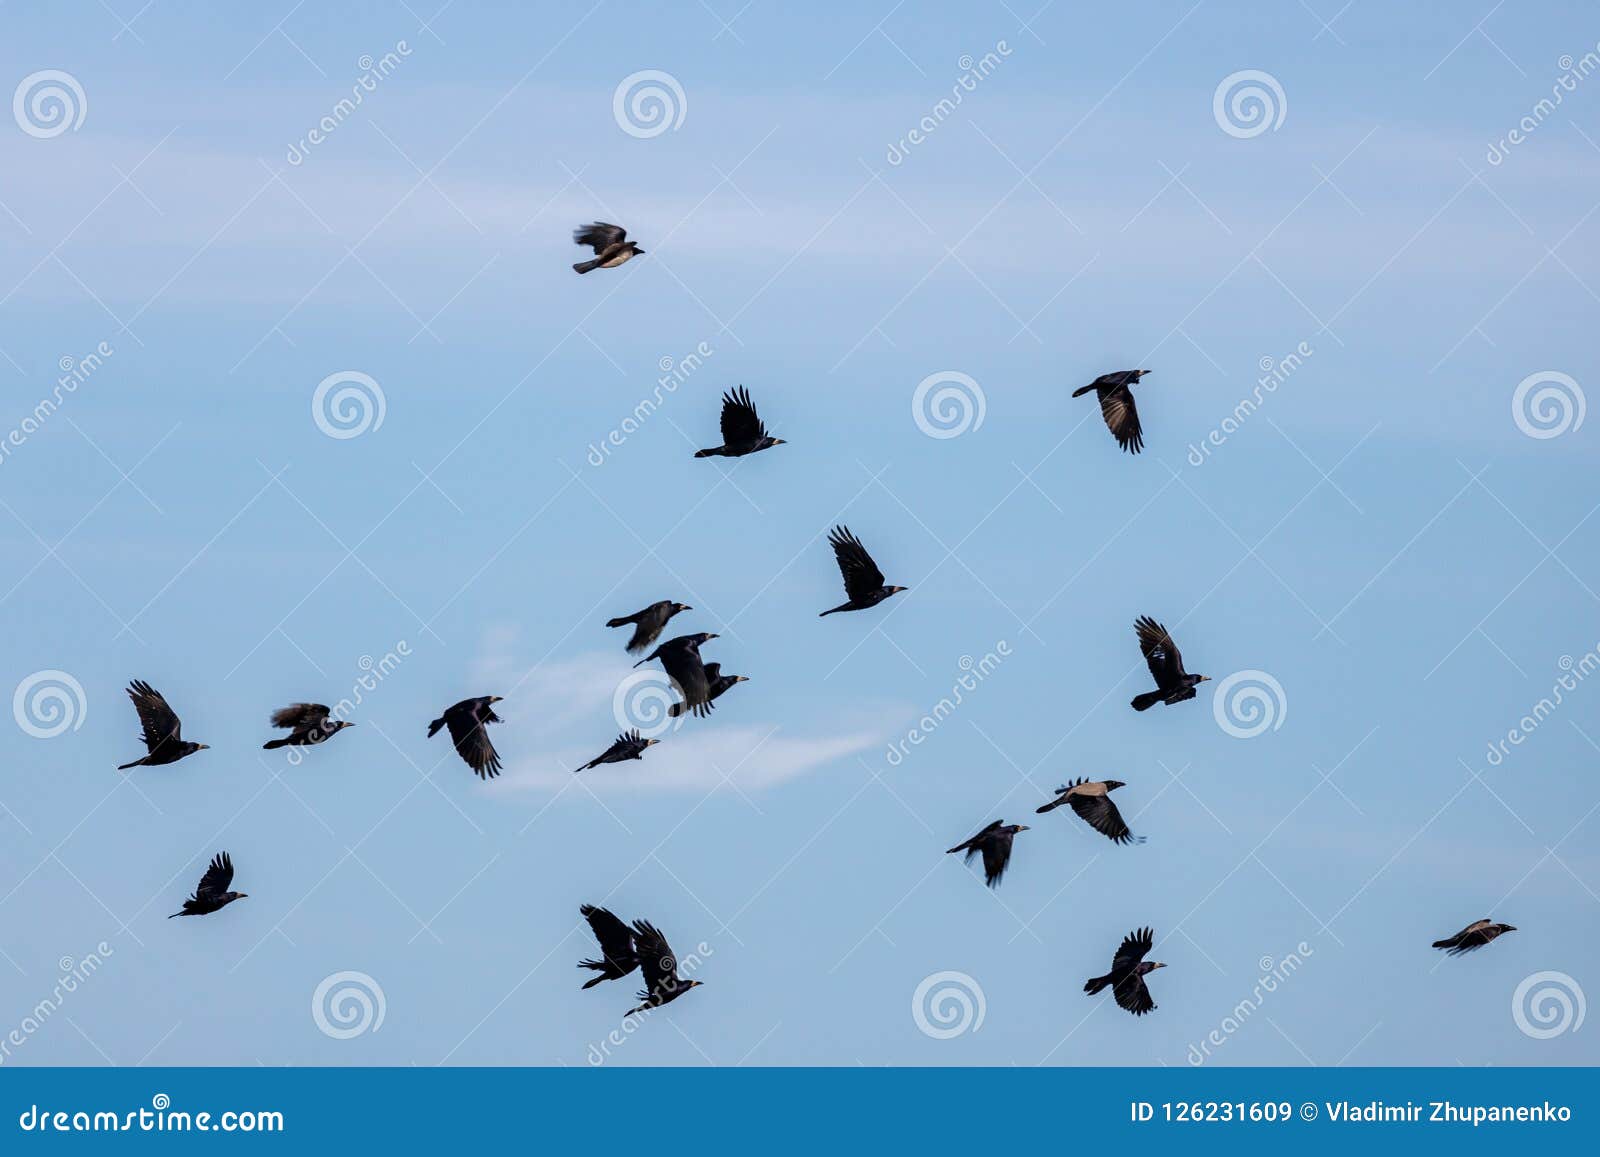 flock of black crows fly on a blue sky background